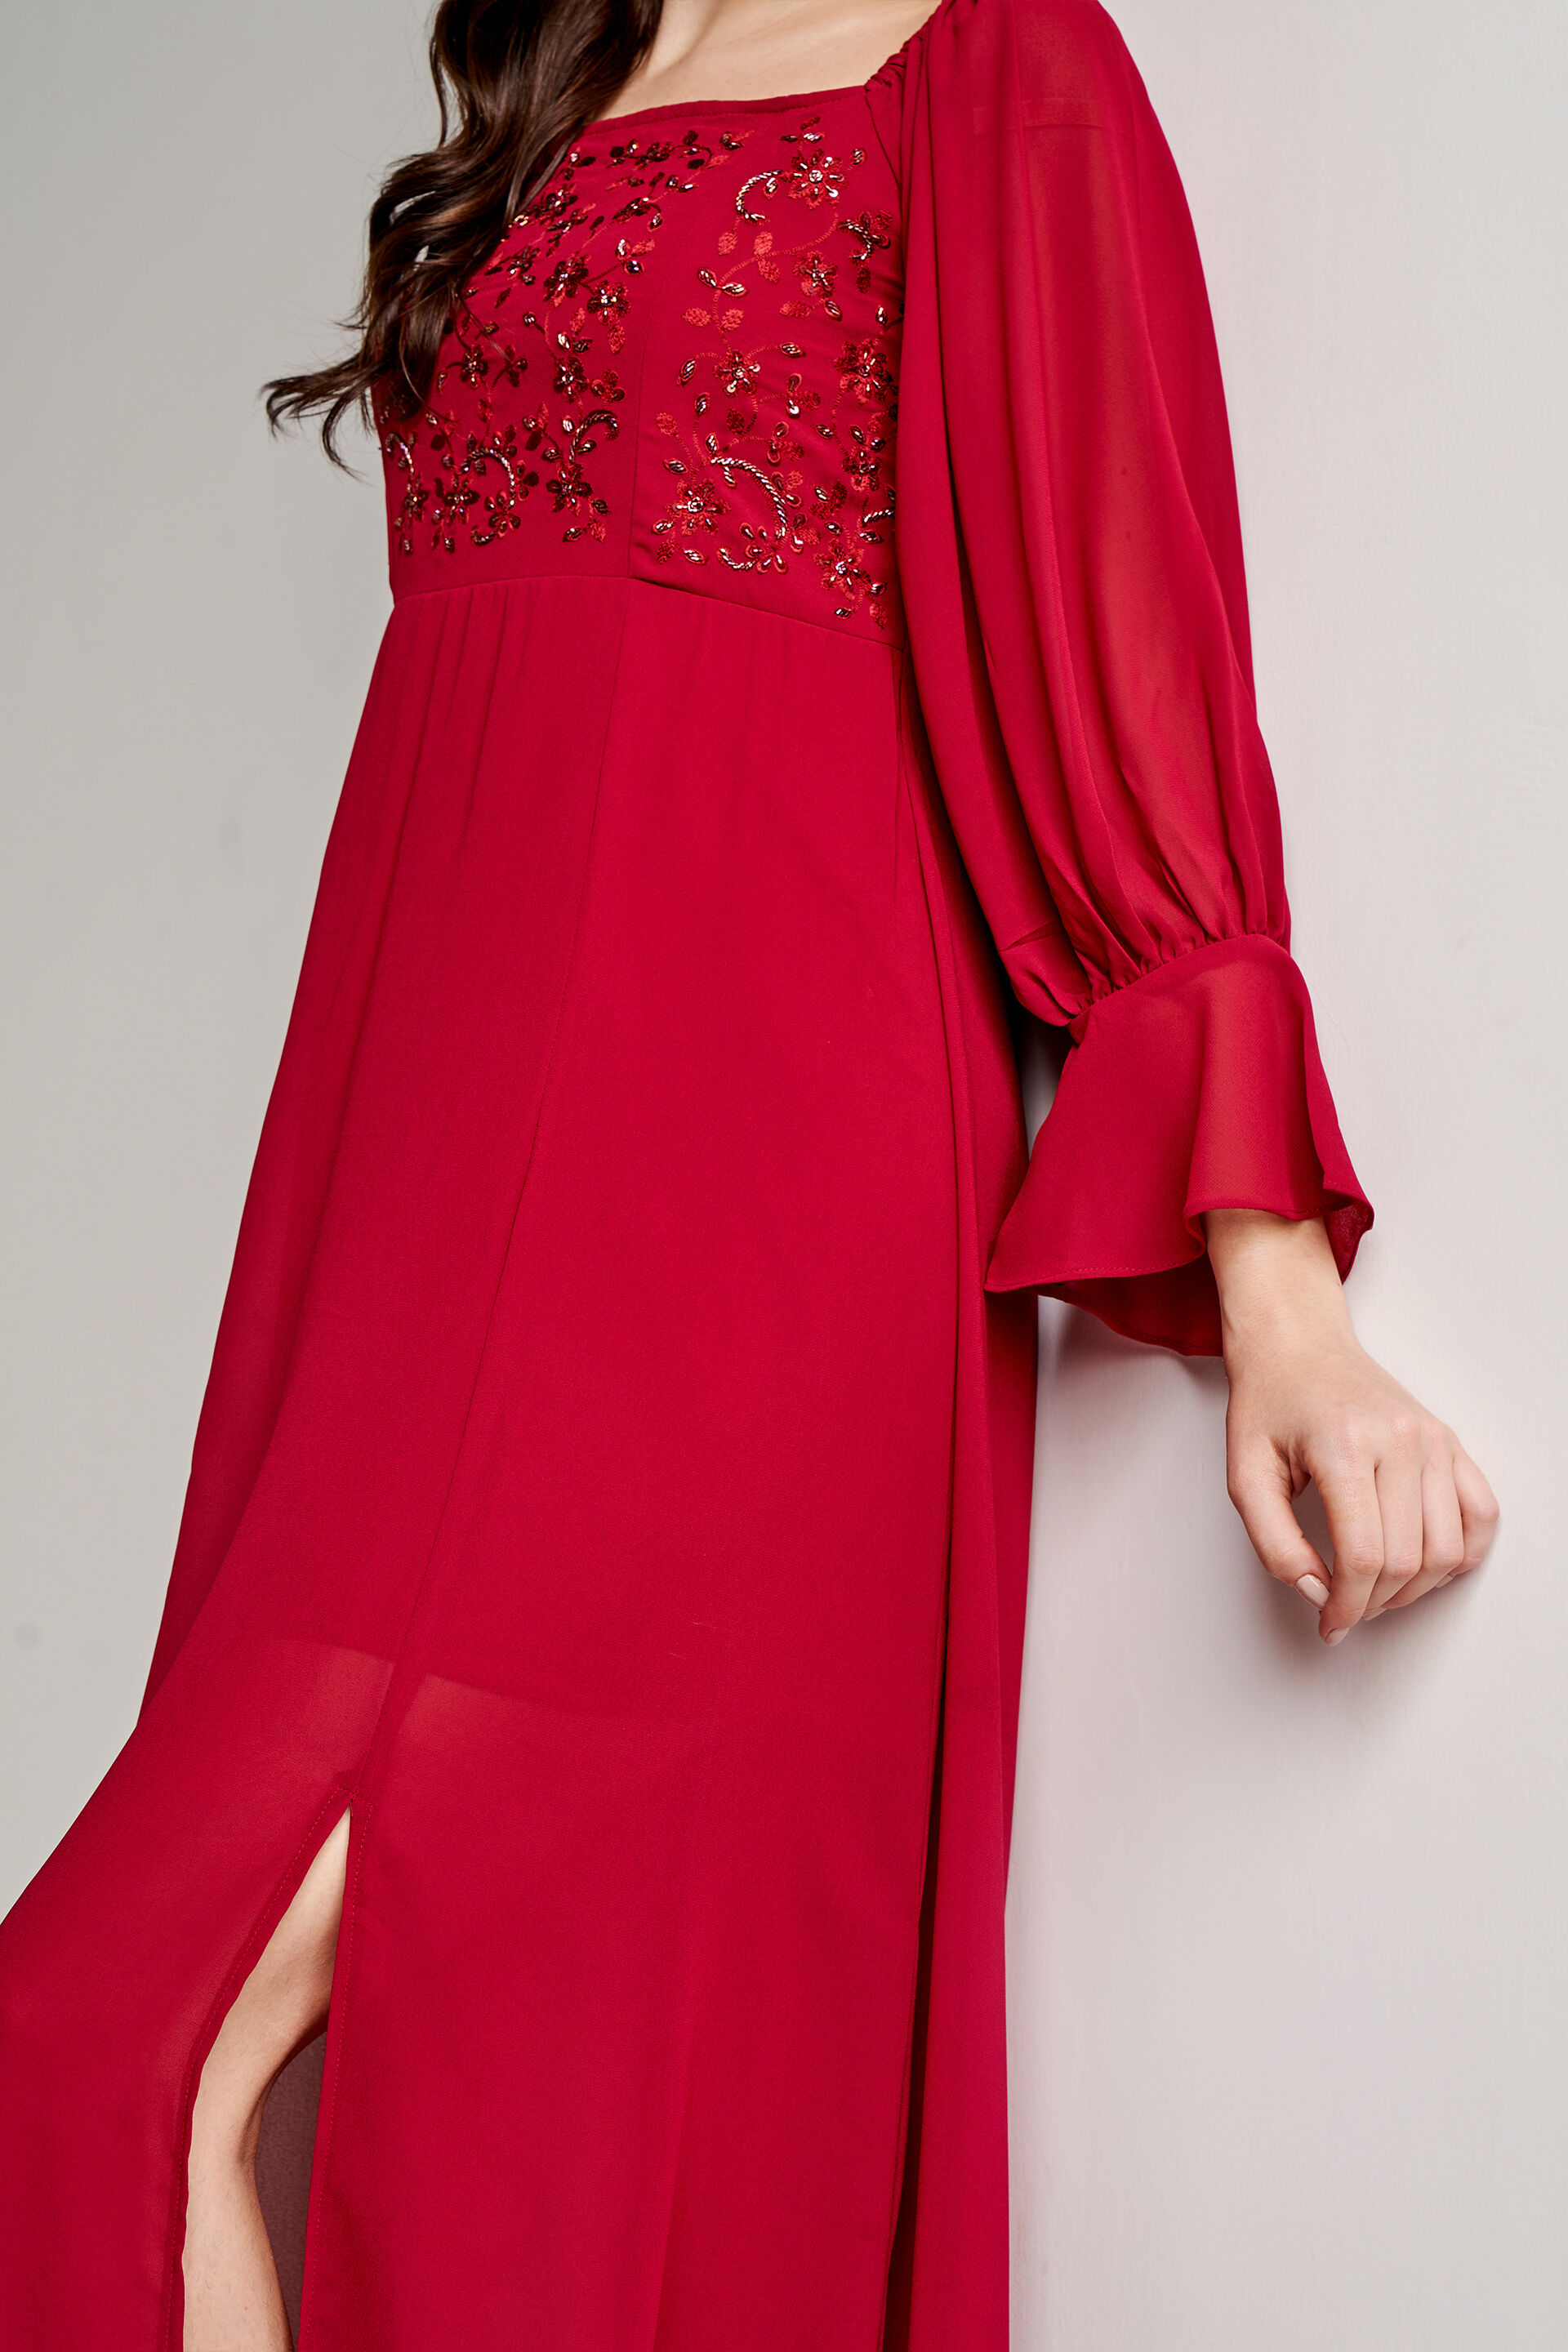 Buy Red Dresses for Women by Mabish By Sonal Jain Online | Ajio.com